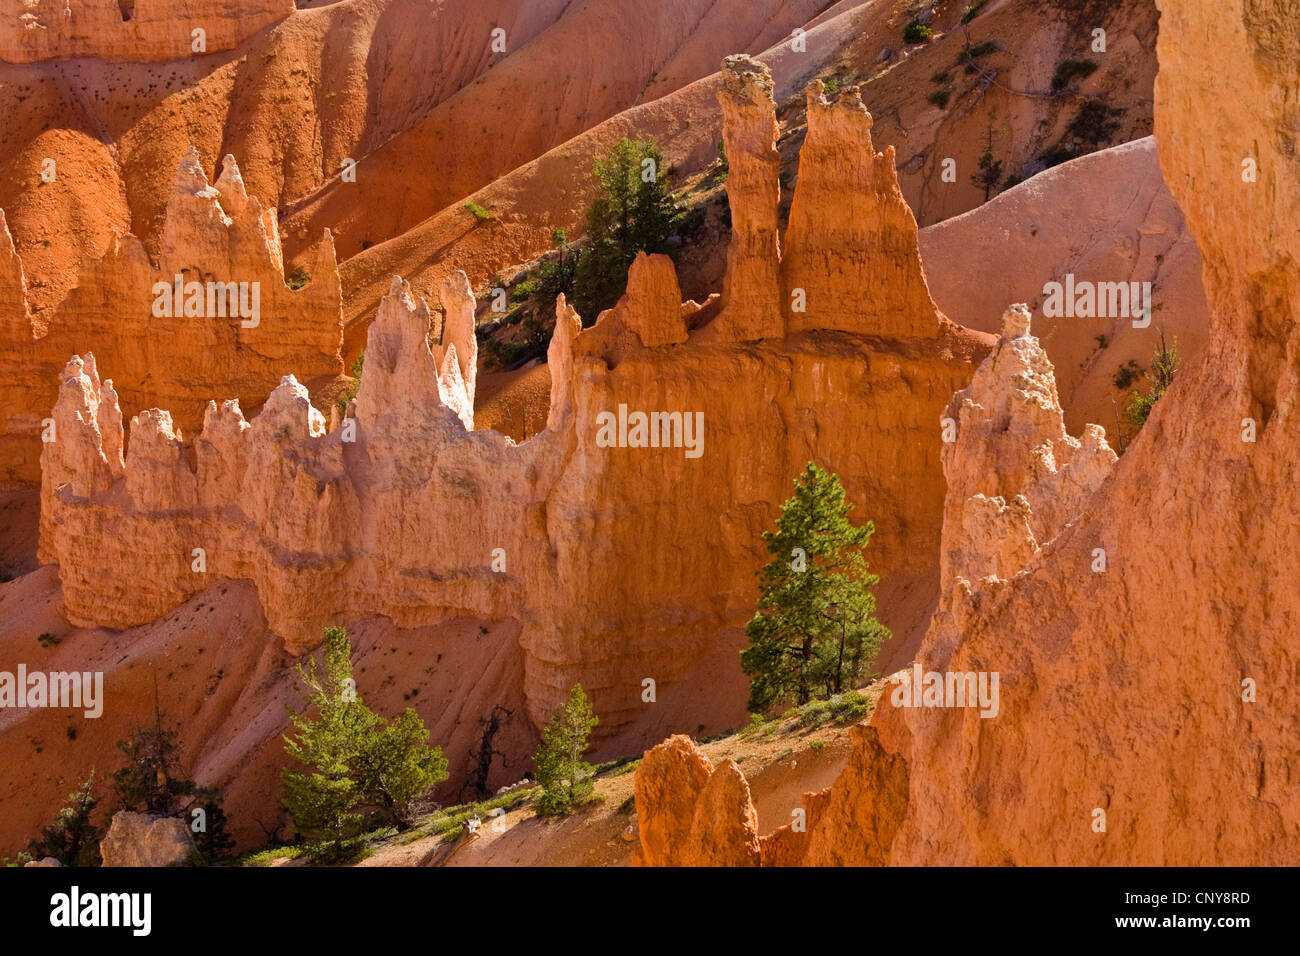 eroded rock formation in Bryce Canyon, USA, Utah, Bryce Canyon National Park, Colorado Plateau Stock Photo